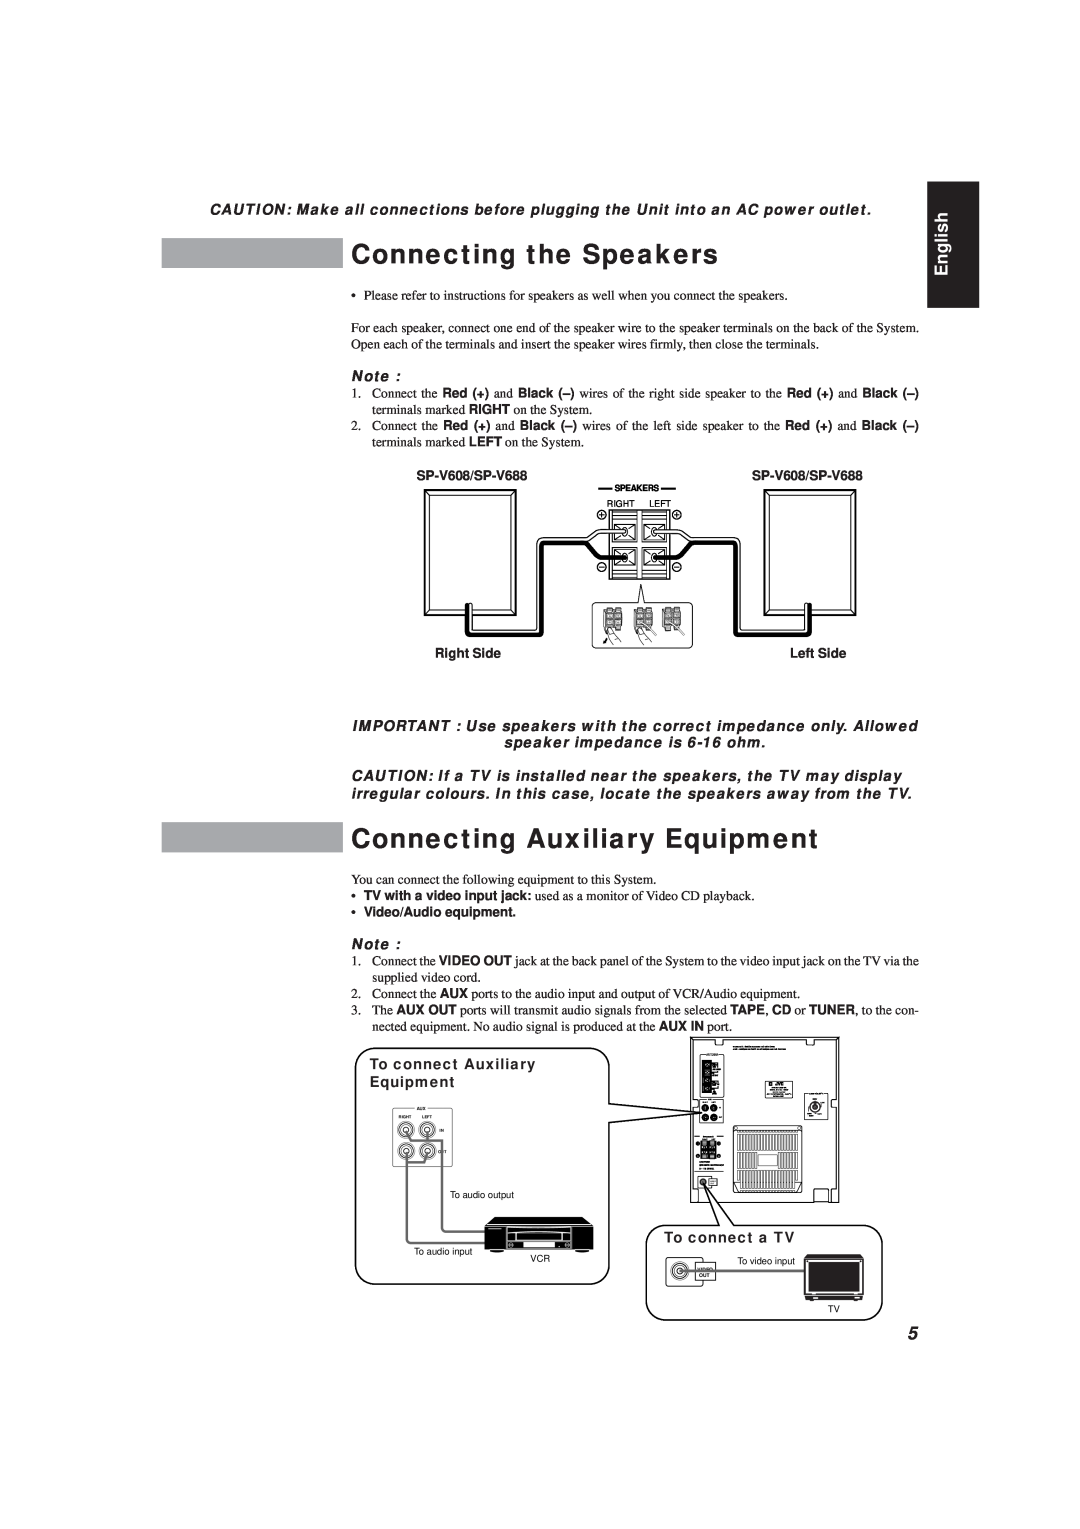 JVC MX-V588T, MX-V508T Connecting the Speakers, Connecting Auxiliary Equipment, English, To connect Auxiliary Equipment 